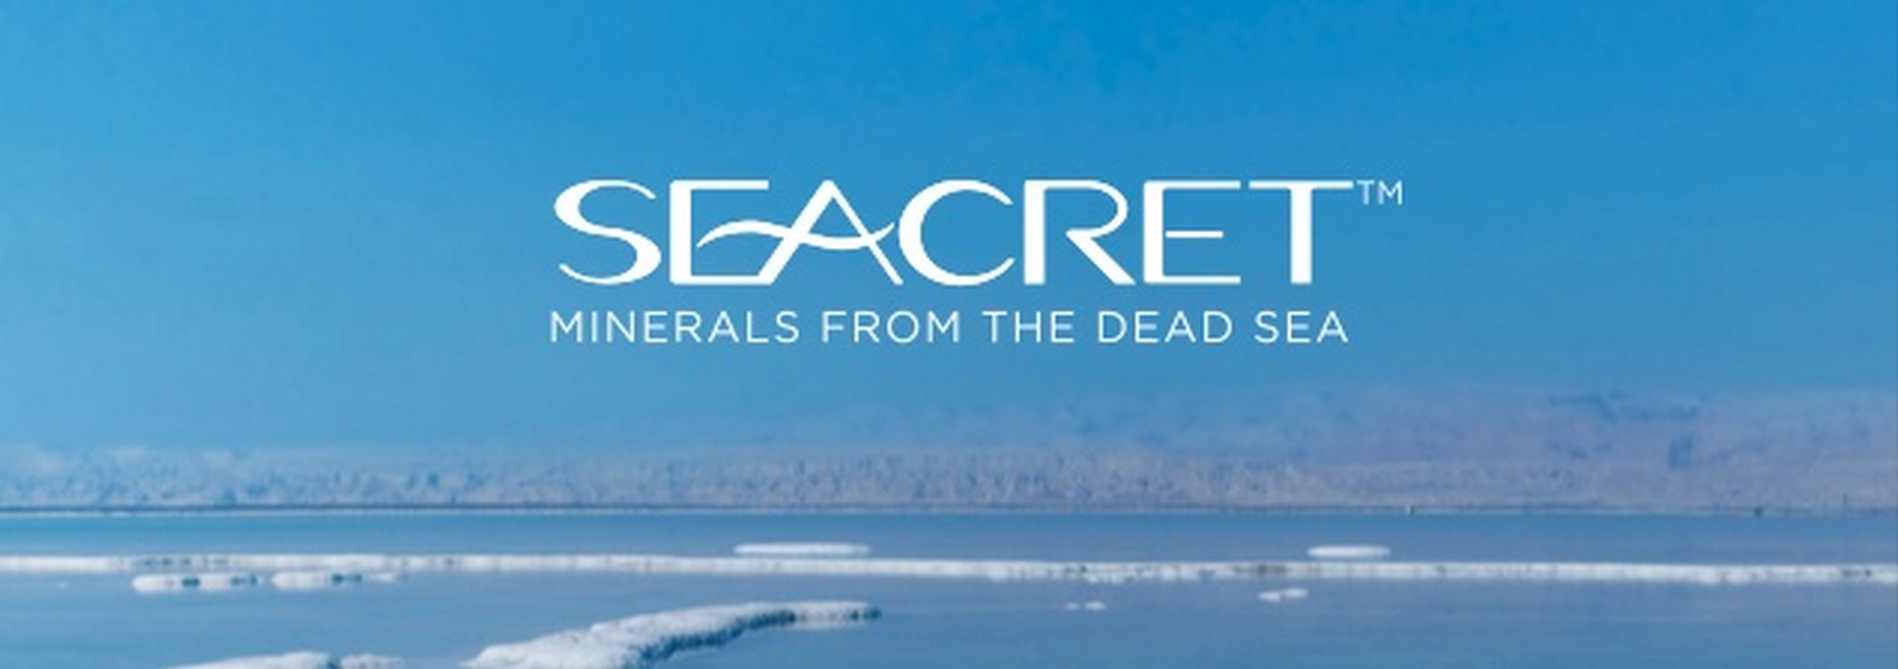 Seacret: A Brand From The Dead Sea